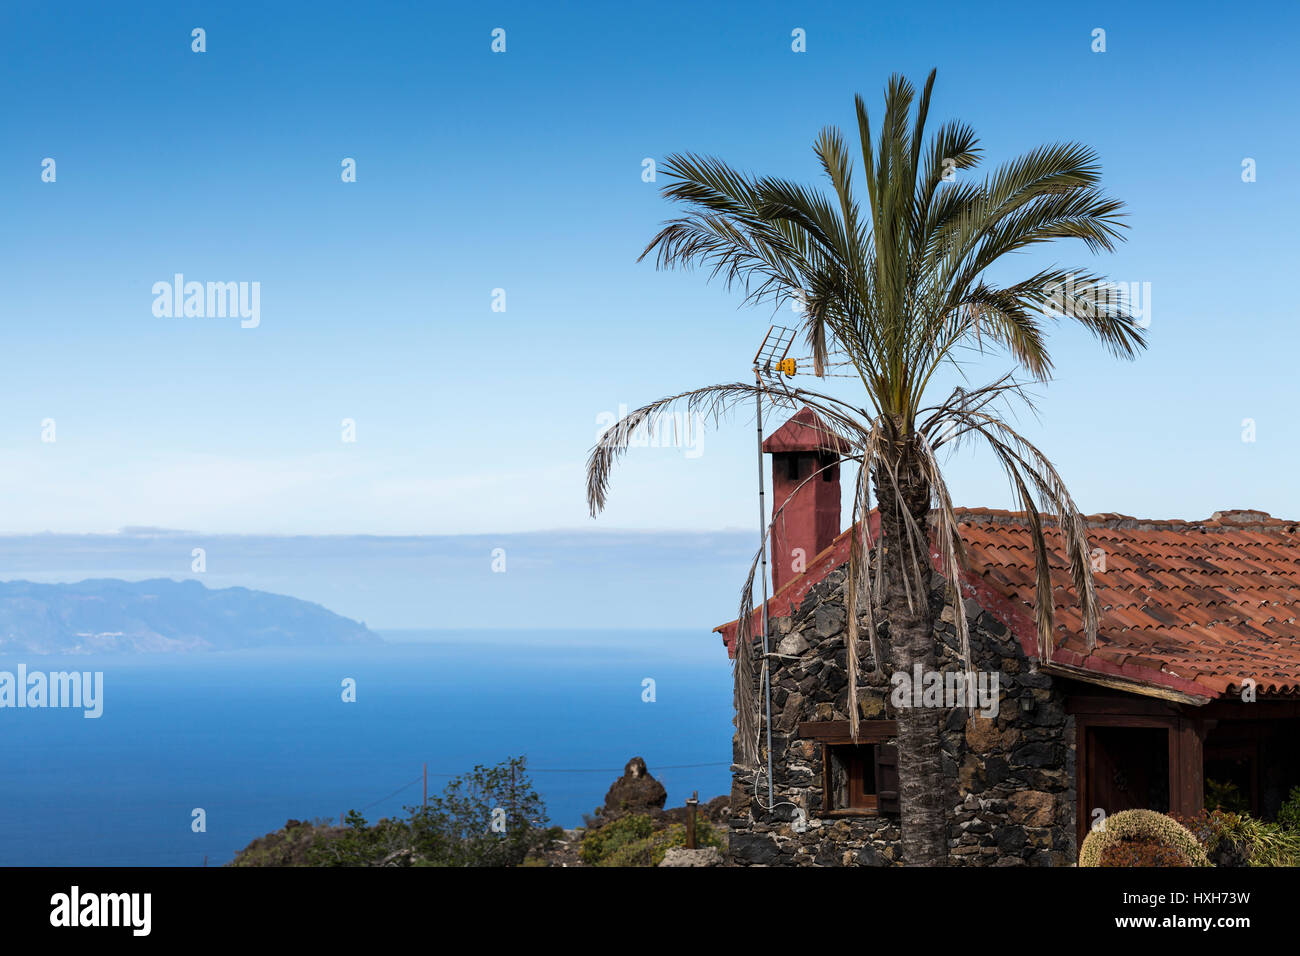 Typical stone built house in the hills of Guia de Isora near Aripe, with panoramic views out to the island of La gomera, Tenerife, Canary Islands, Spa Stock Photo